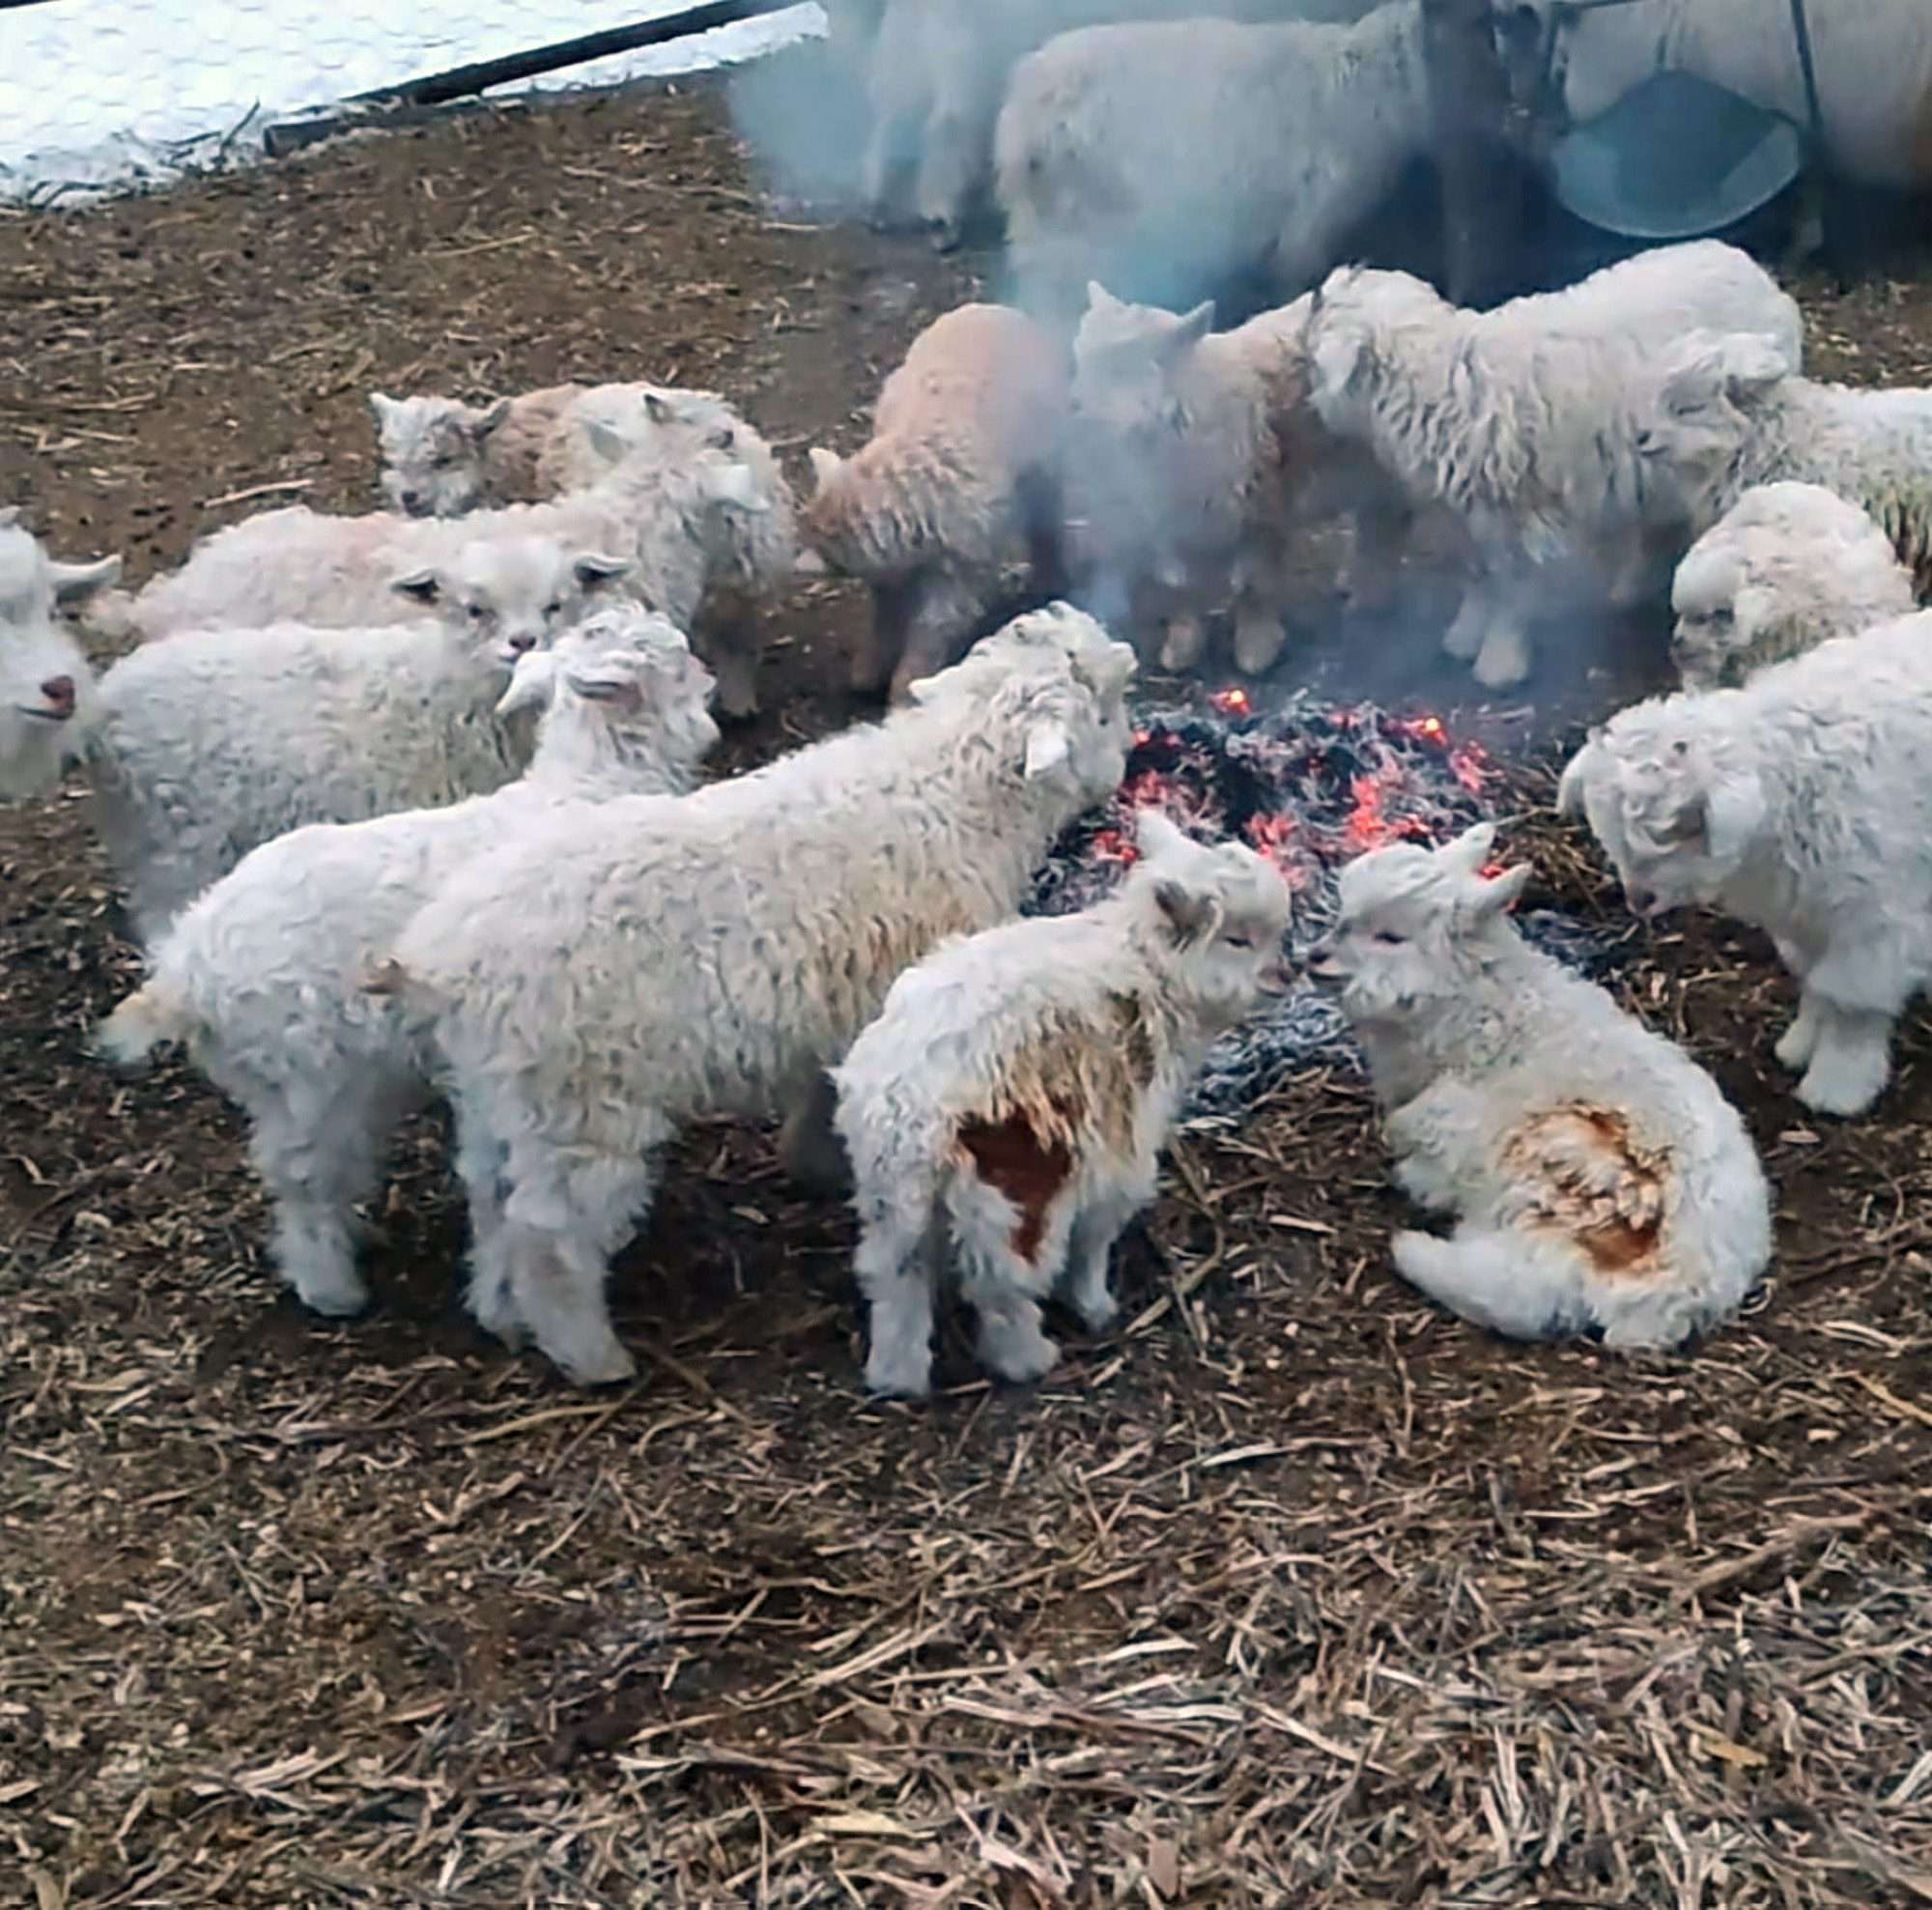 Read more about the article Plan By Kindhearted Farmer To Warm Up Flock Backfires When Lambs Catch Alight